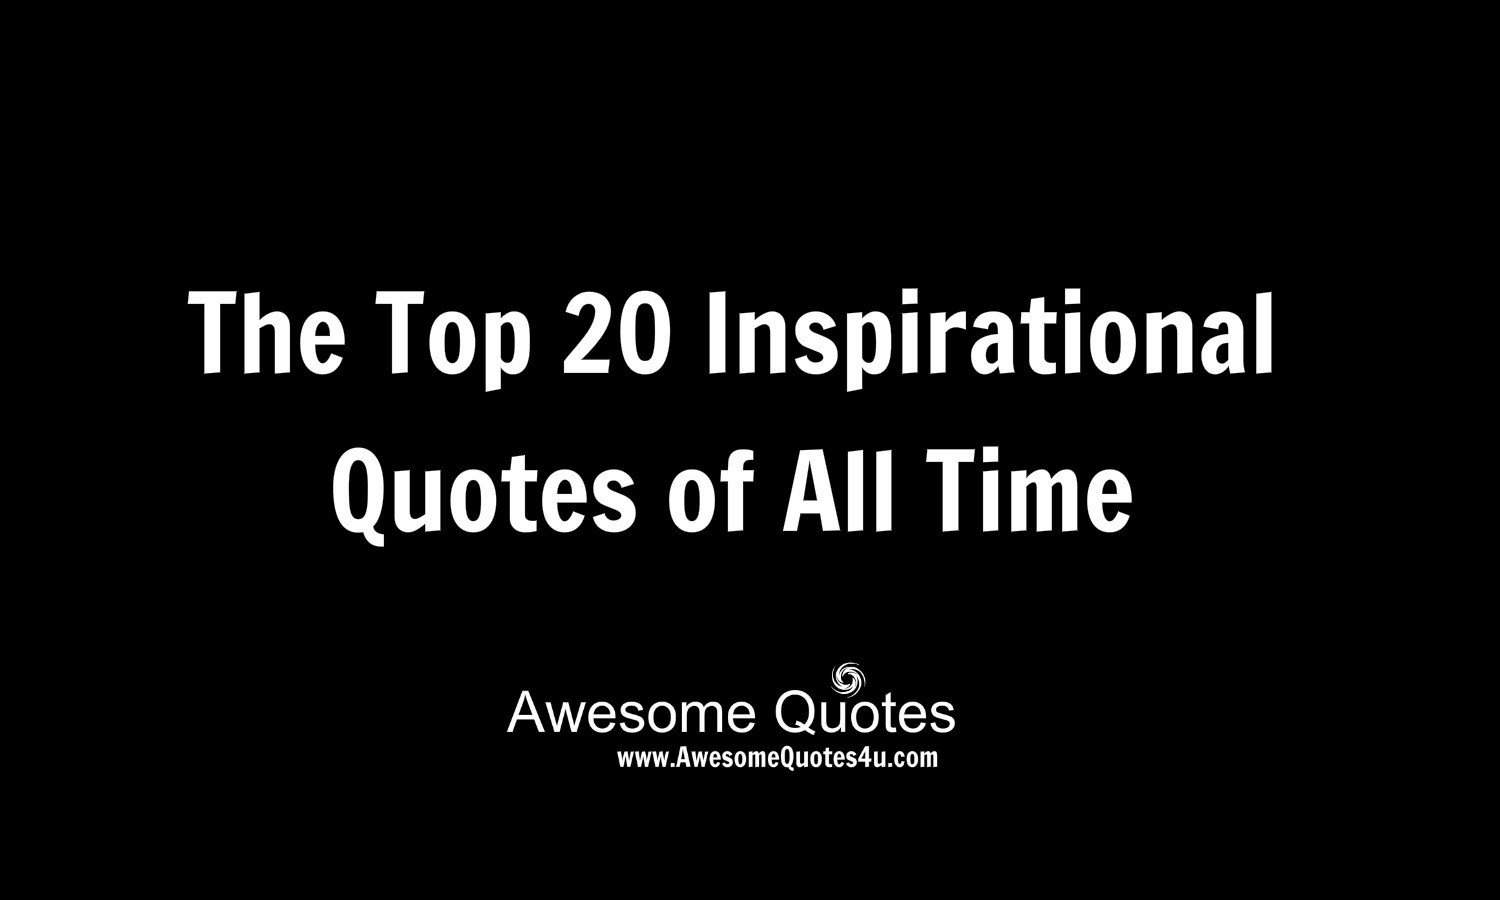 Best Motivational Quote Of All Time
 Awesome Quotes The Top 20 Inspirational Quotes of All Time